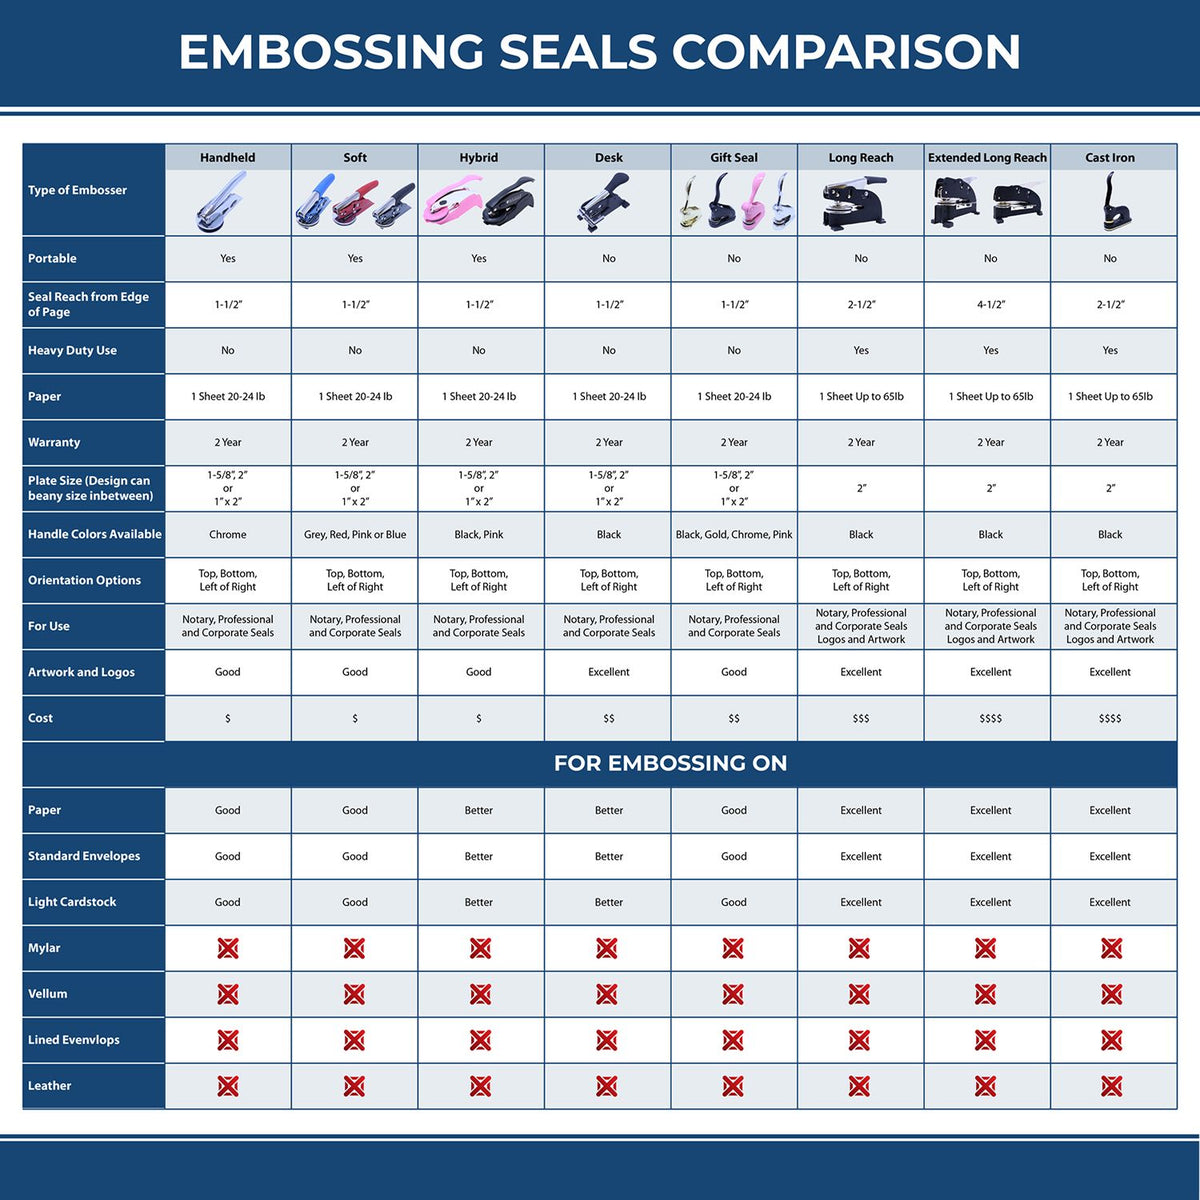 A comparison chart for the different types of mount models available for the State of West Virginia Long Reach Architectural Embossing Seal.